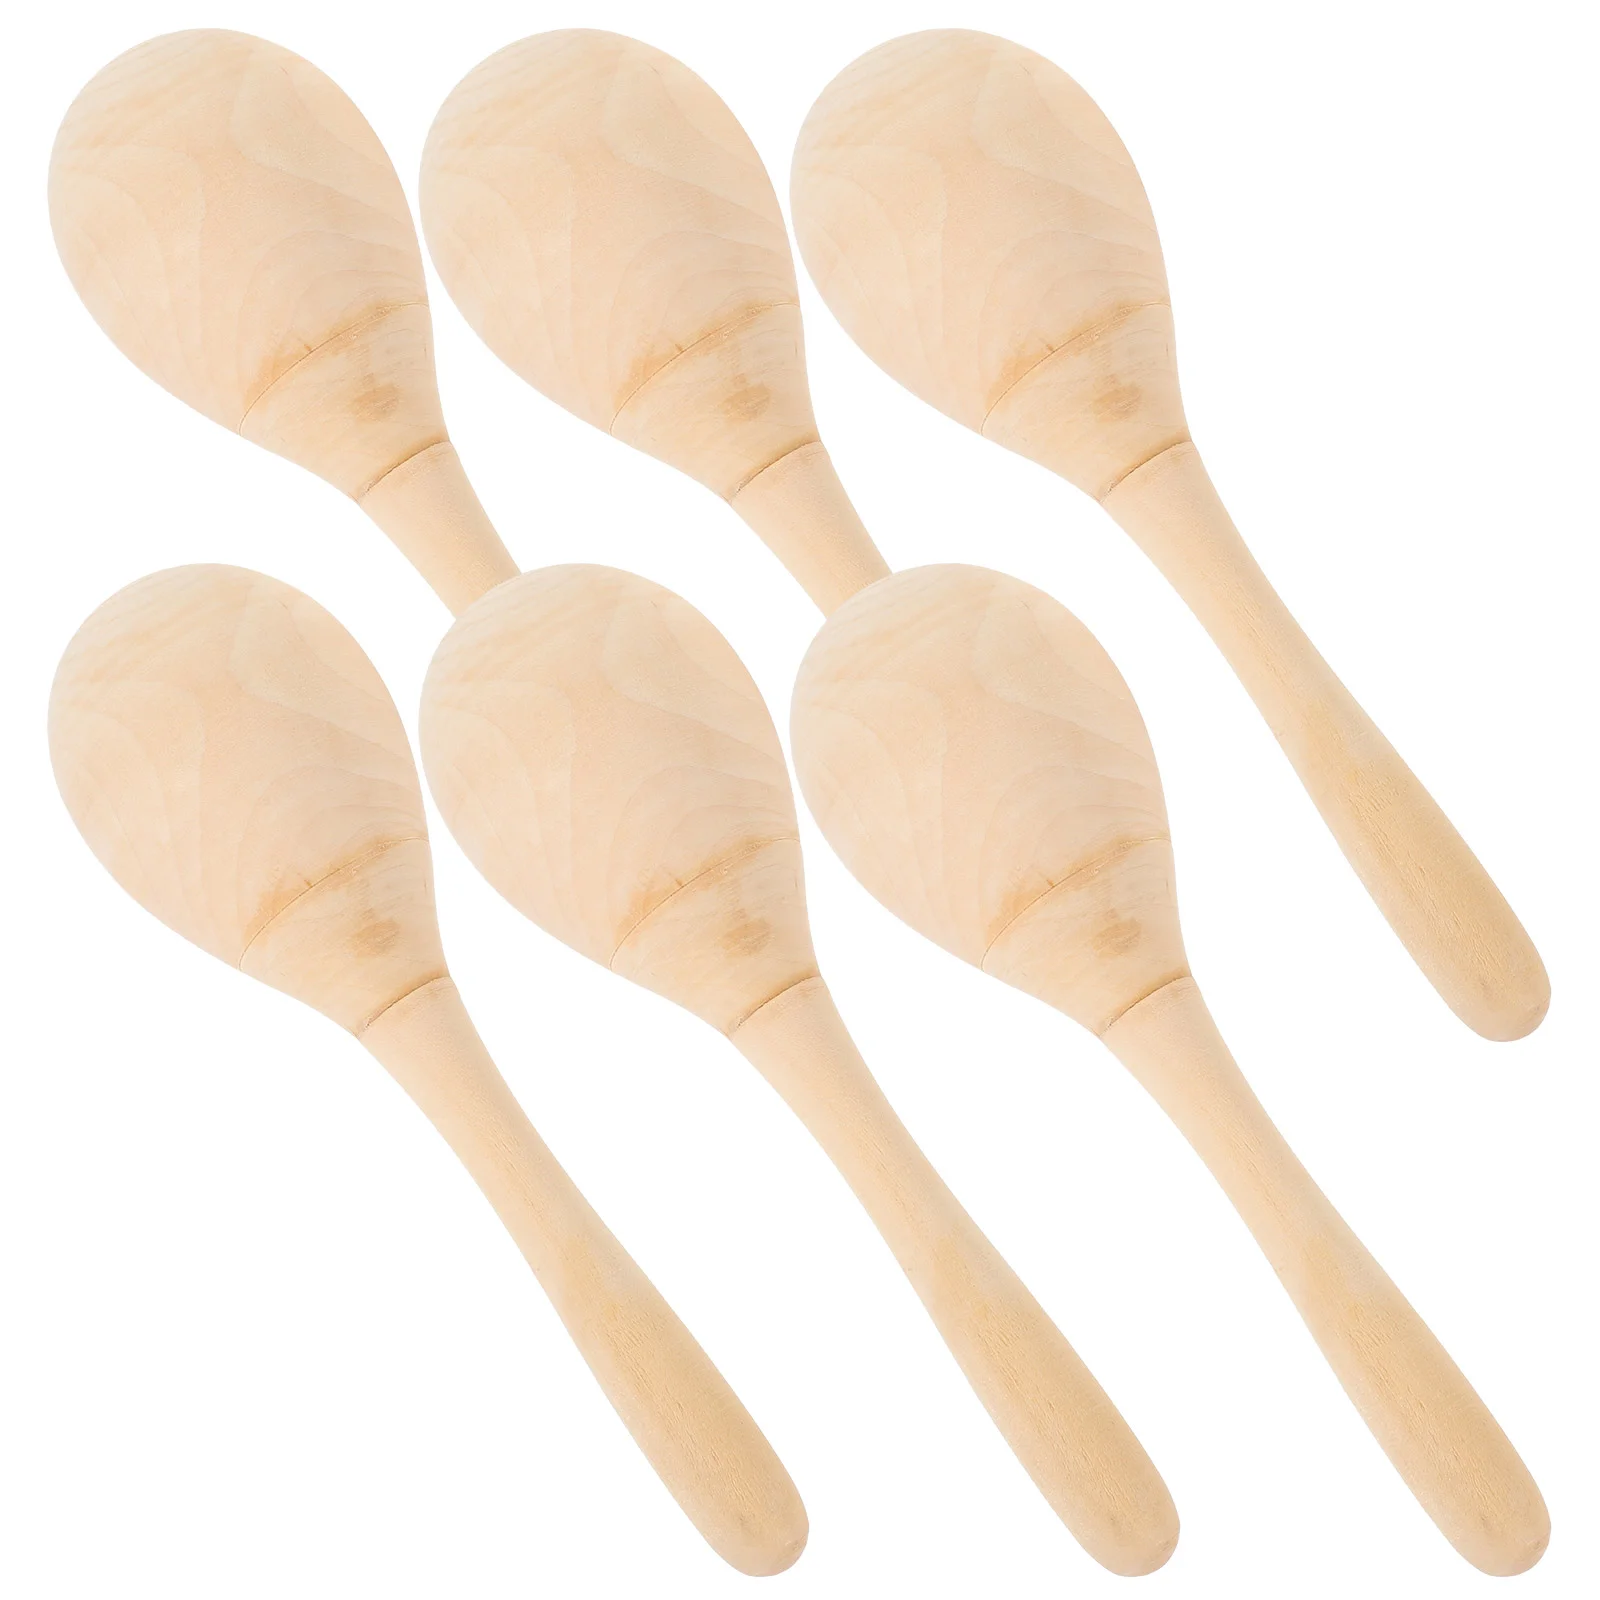 

6 Pcs Wooden Maraca Interactive Toys DIY Auditory Training Maracas Grasp Kids' Musical Instruments Plaything Educational for